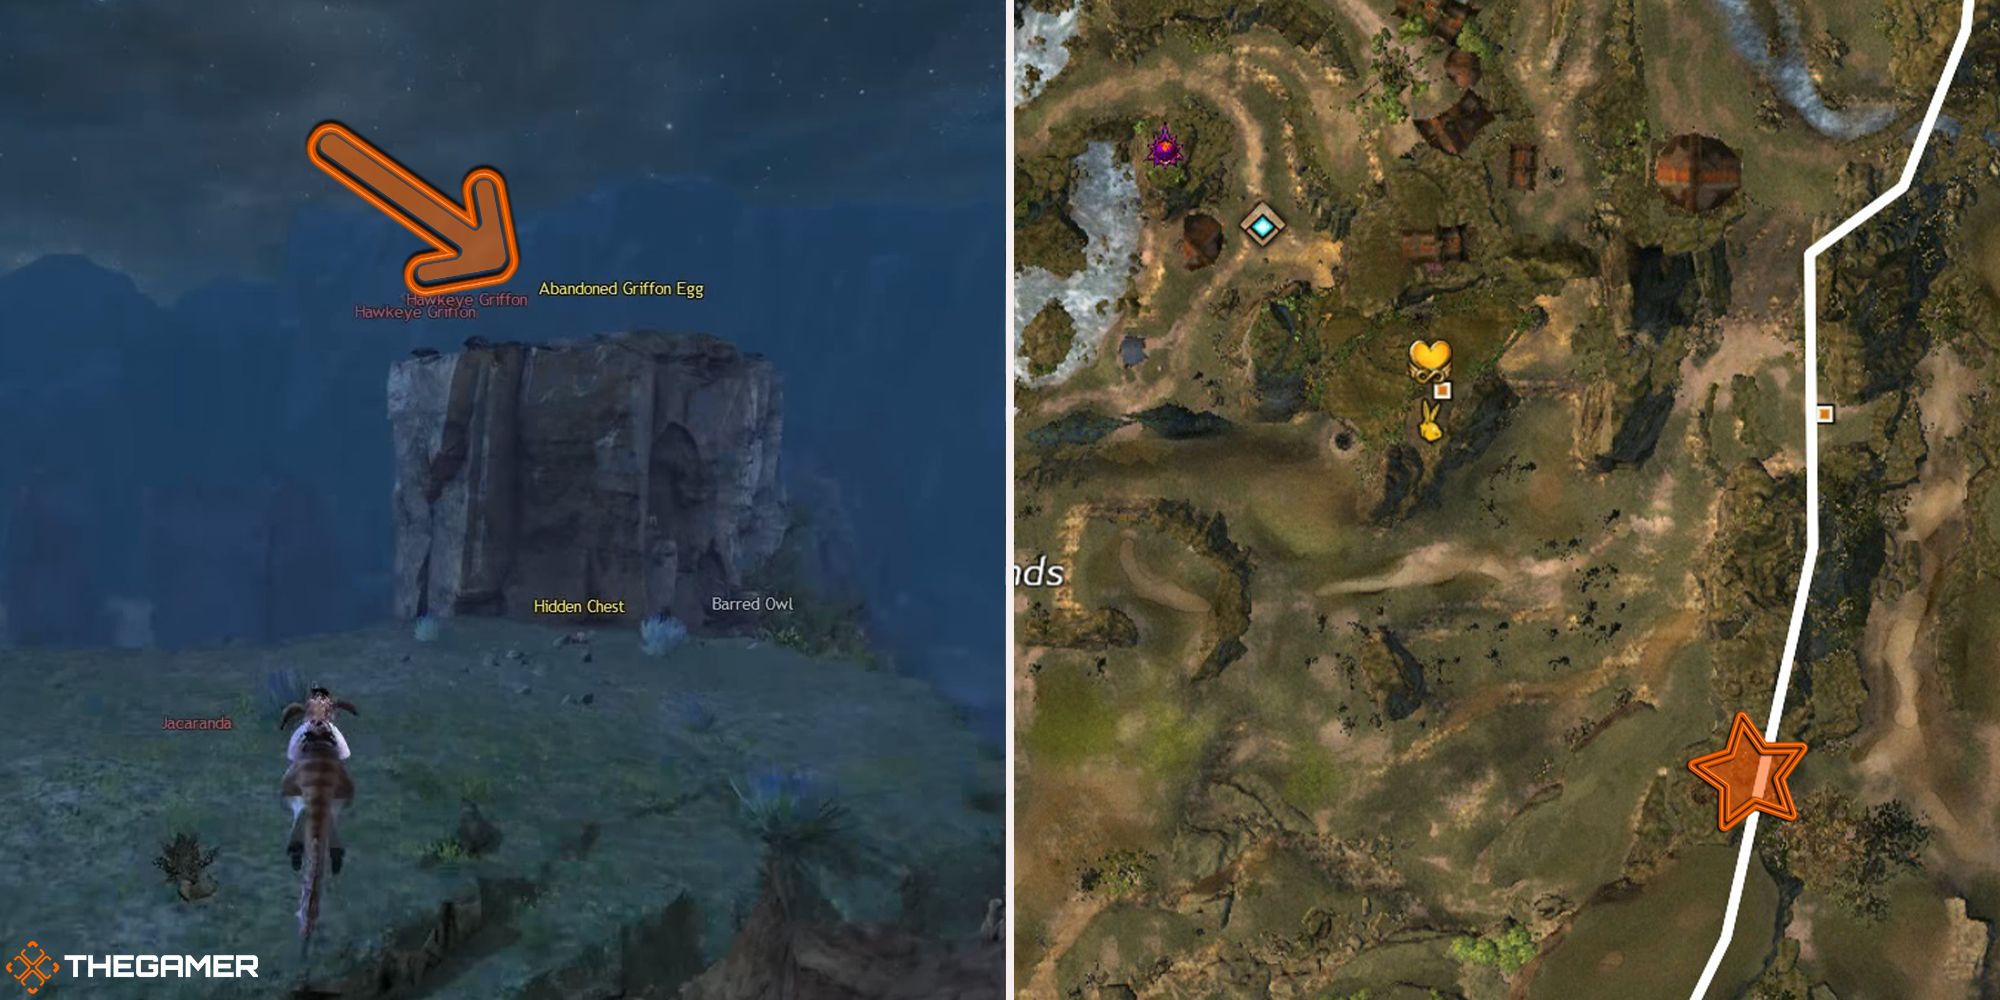 Guild Wars 2 - location of the Vibrant Mountain Griffon Egg